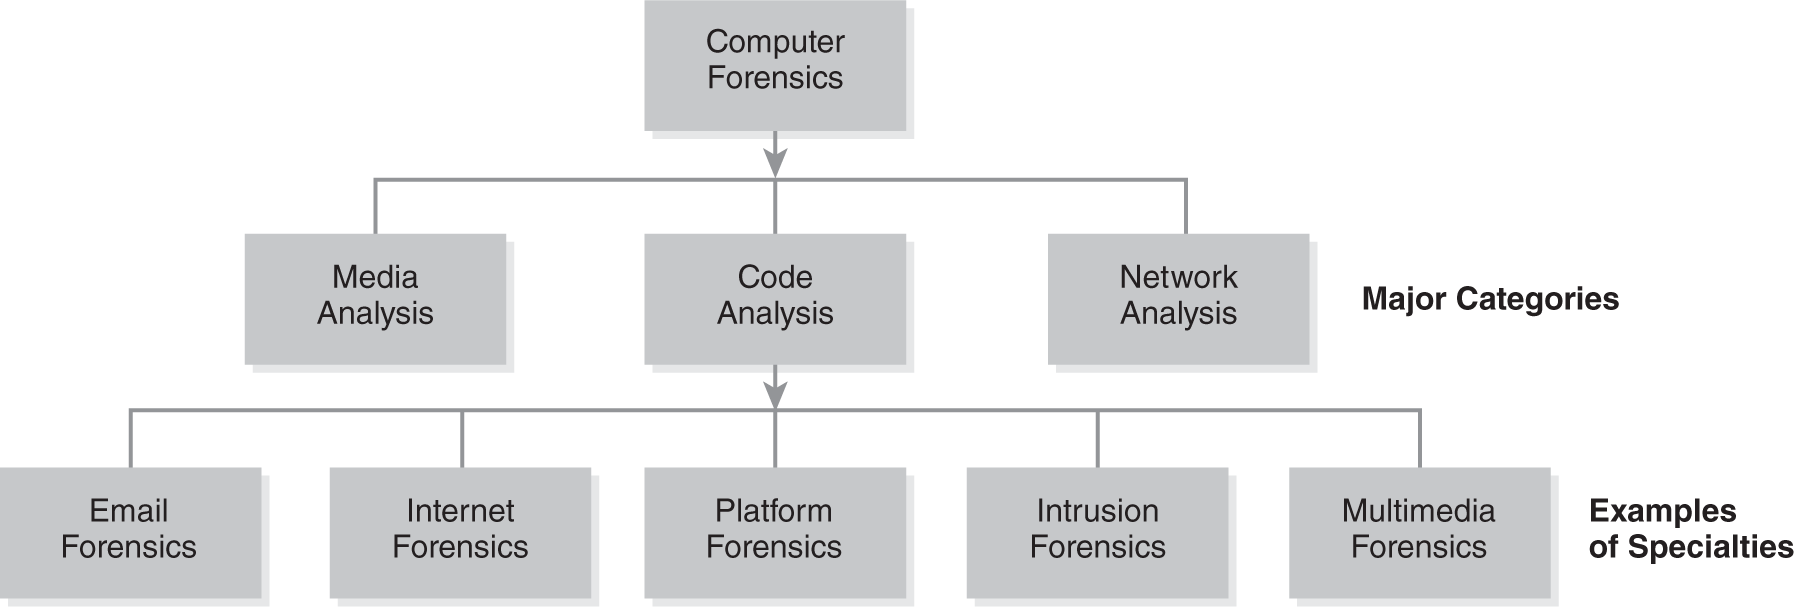 A diagram shows the different major computer forensic categories: media analysis, code analysis, and network analysis. Some examples include email forensics, internet forensics, platform forensics, intrusion forensics, and multimedia forensics.